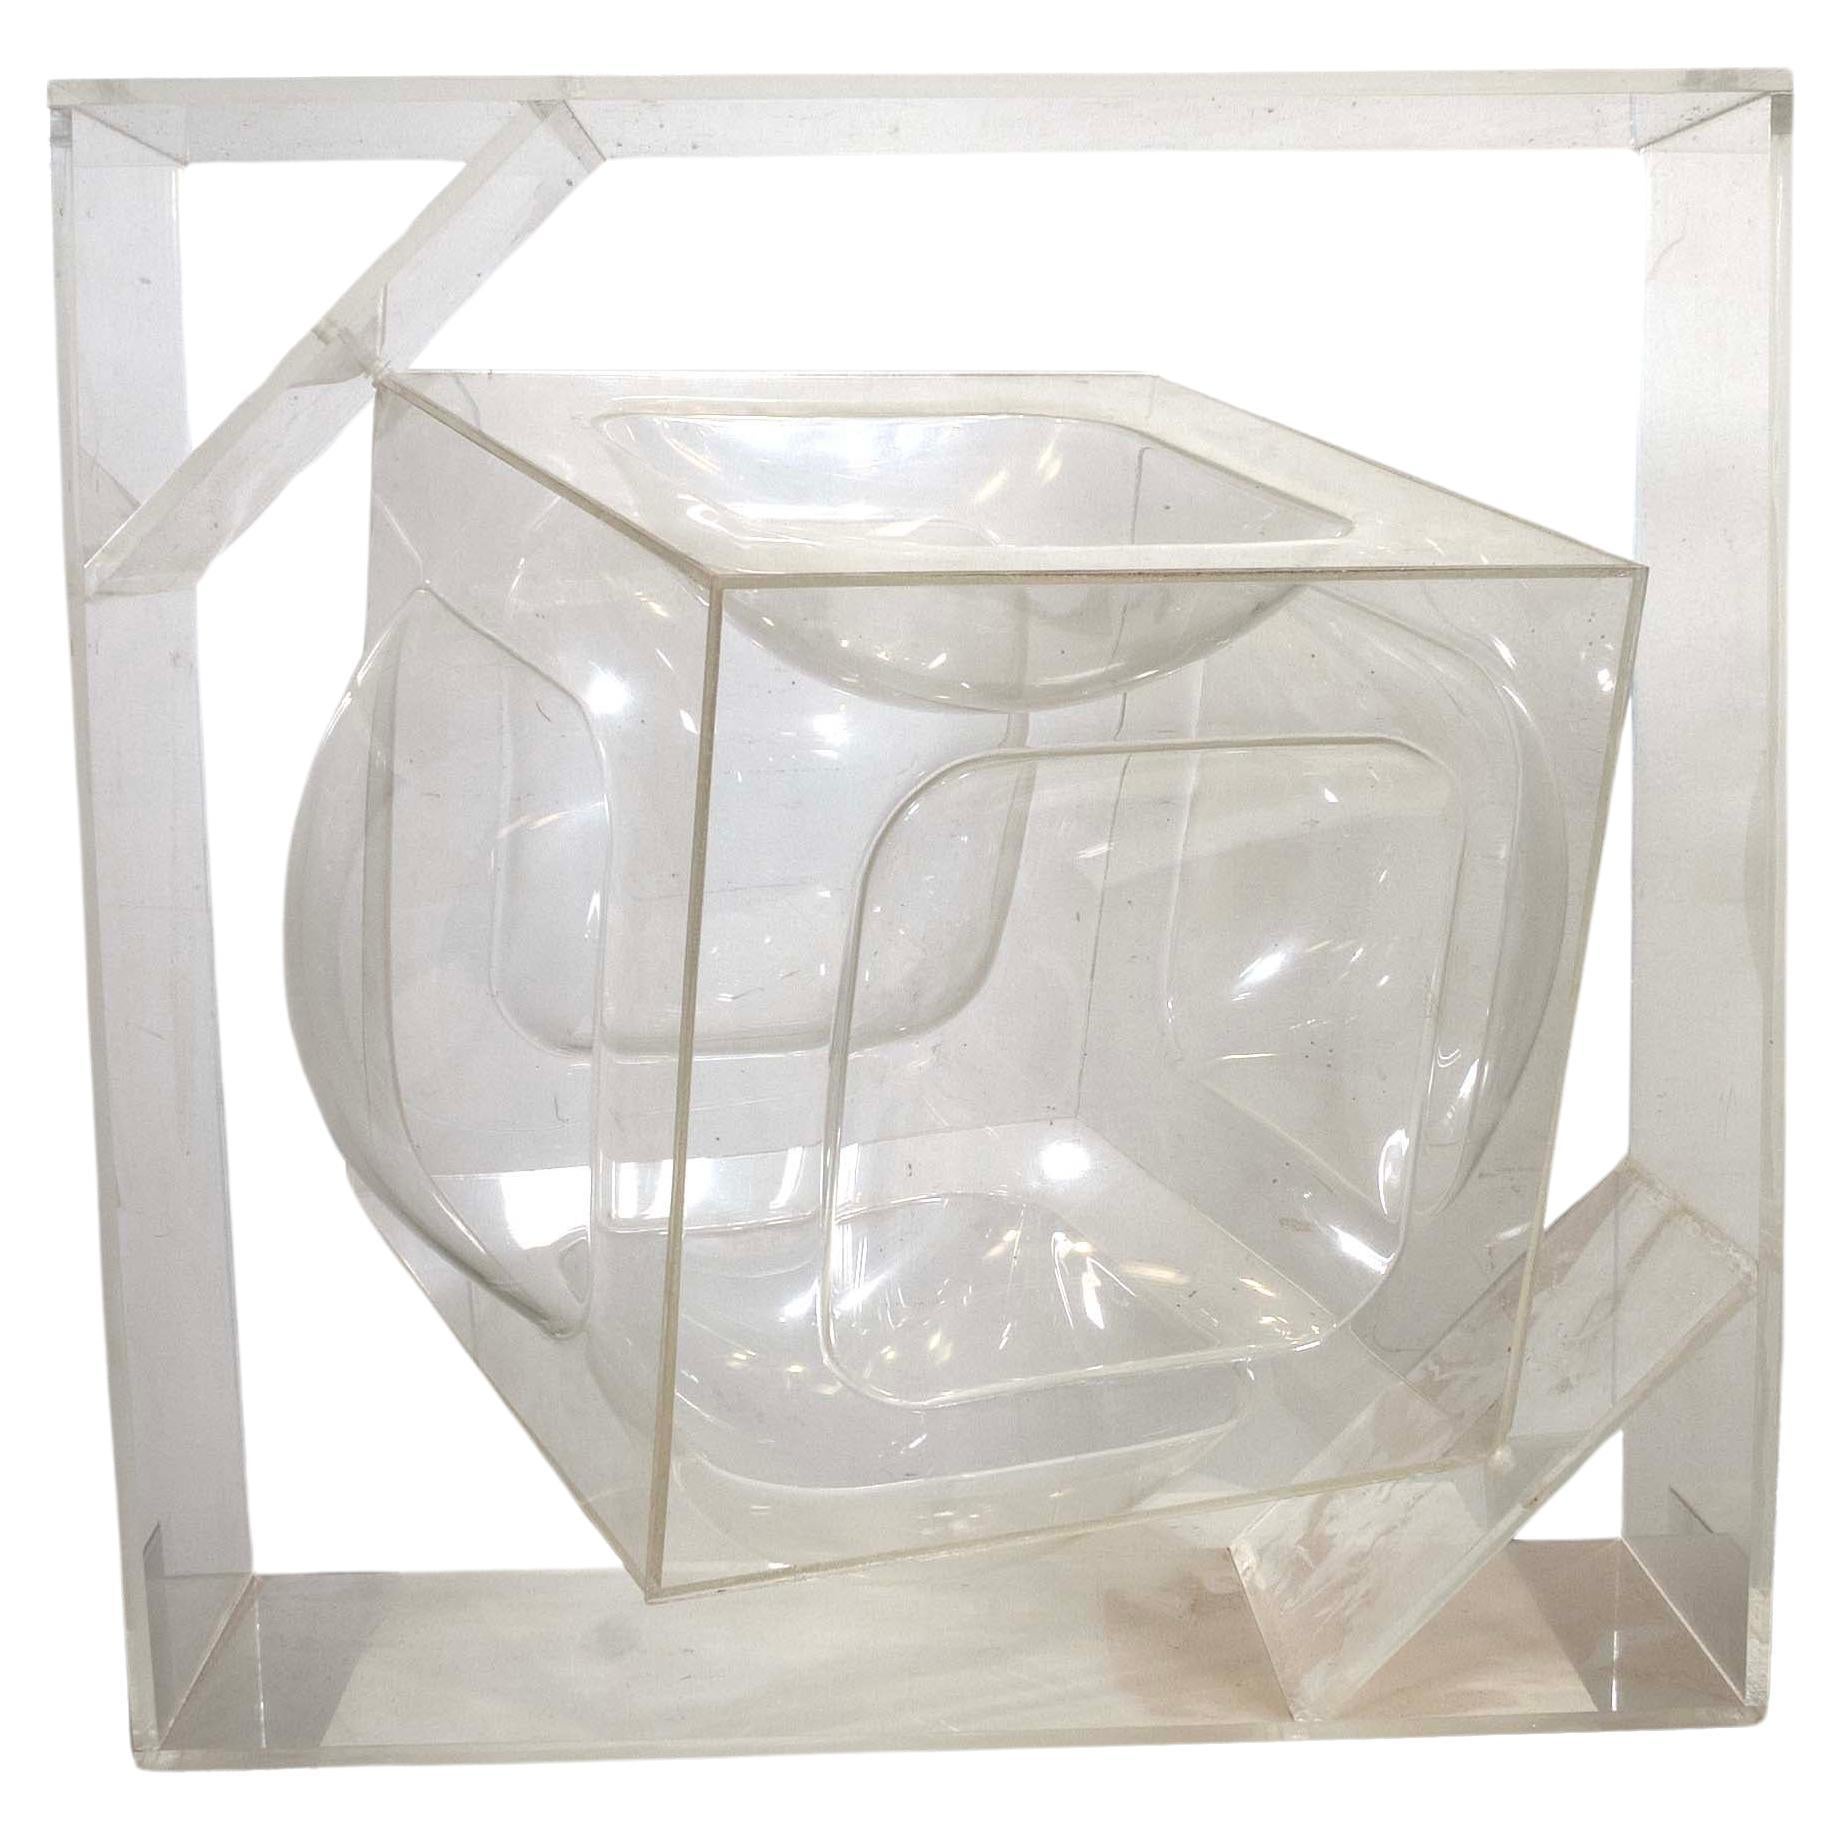  Postmodern Space Age Mod Lucite Acrylic Floating and Rotating Cube Sculpture